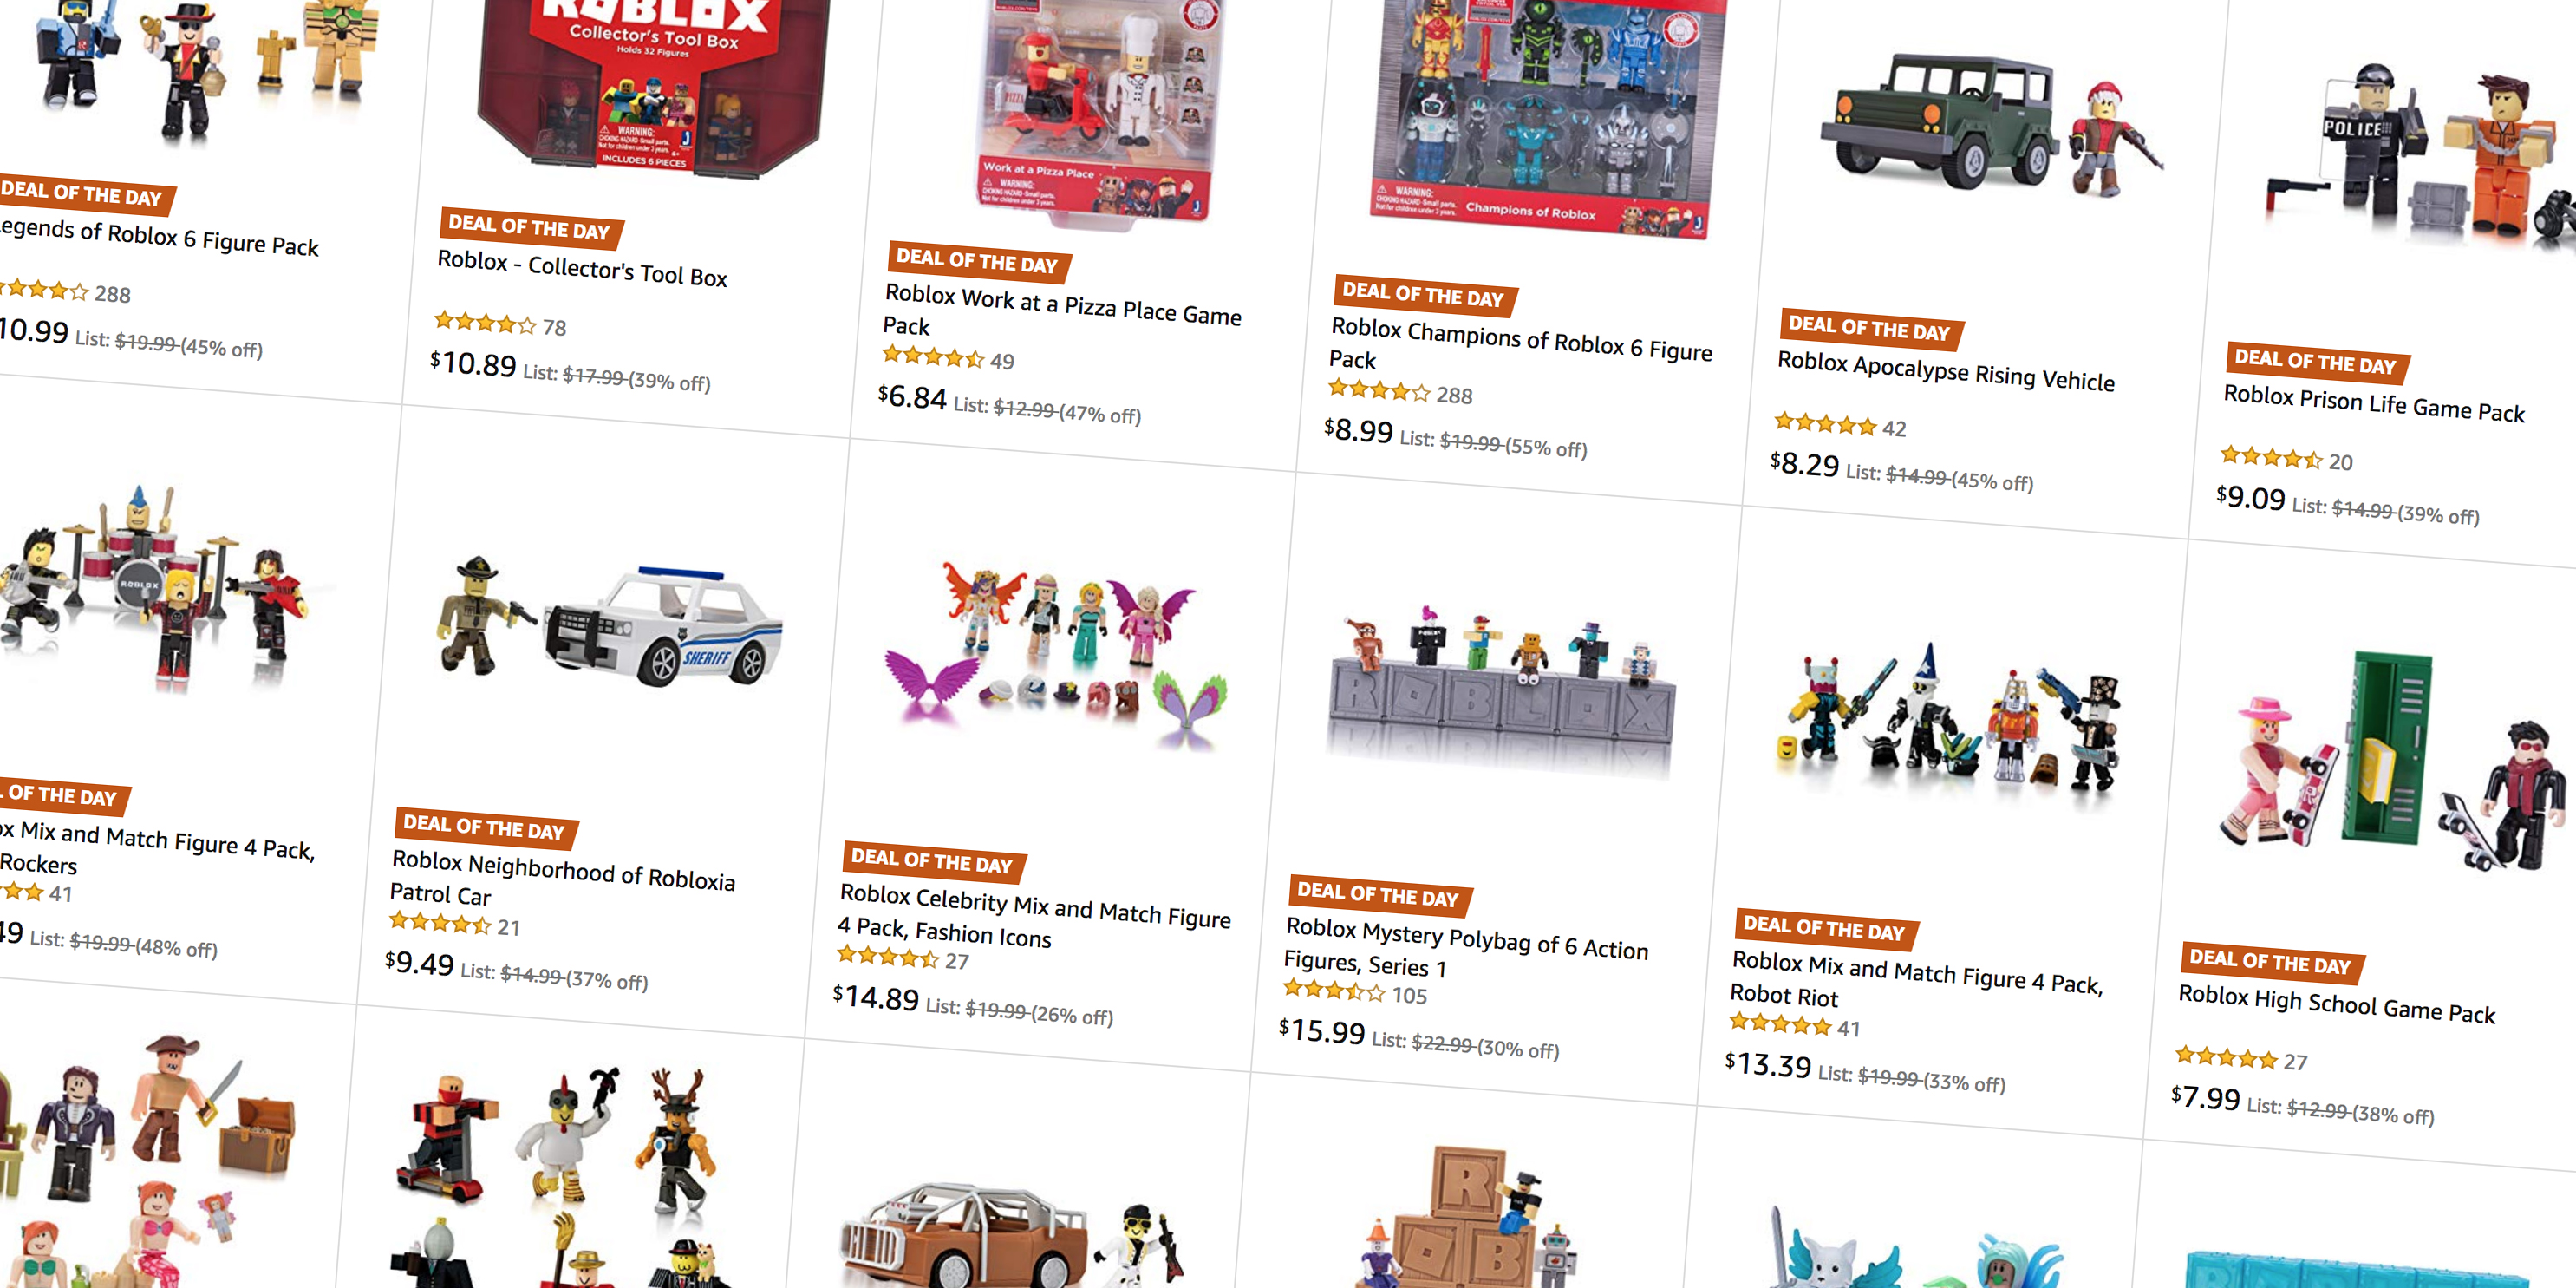 Expand Your Roblox Collection With Deals From Under 7 In Today S Amazon Gold Box 9to5toys - roblox celebrity mystery figure series 1 polybag of 6